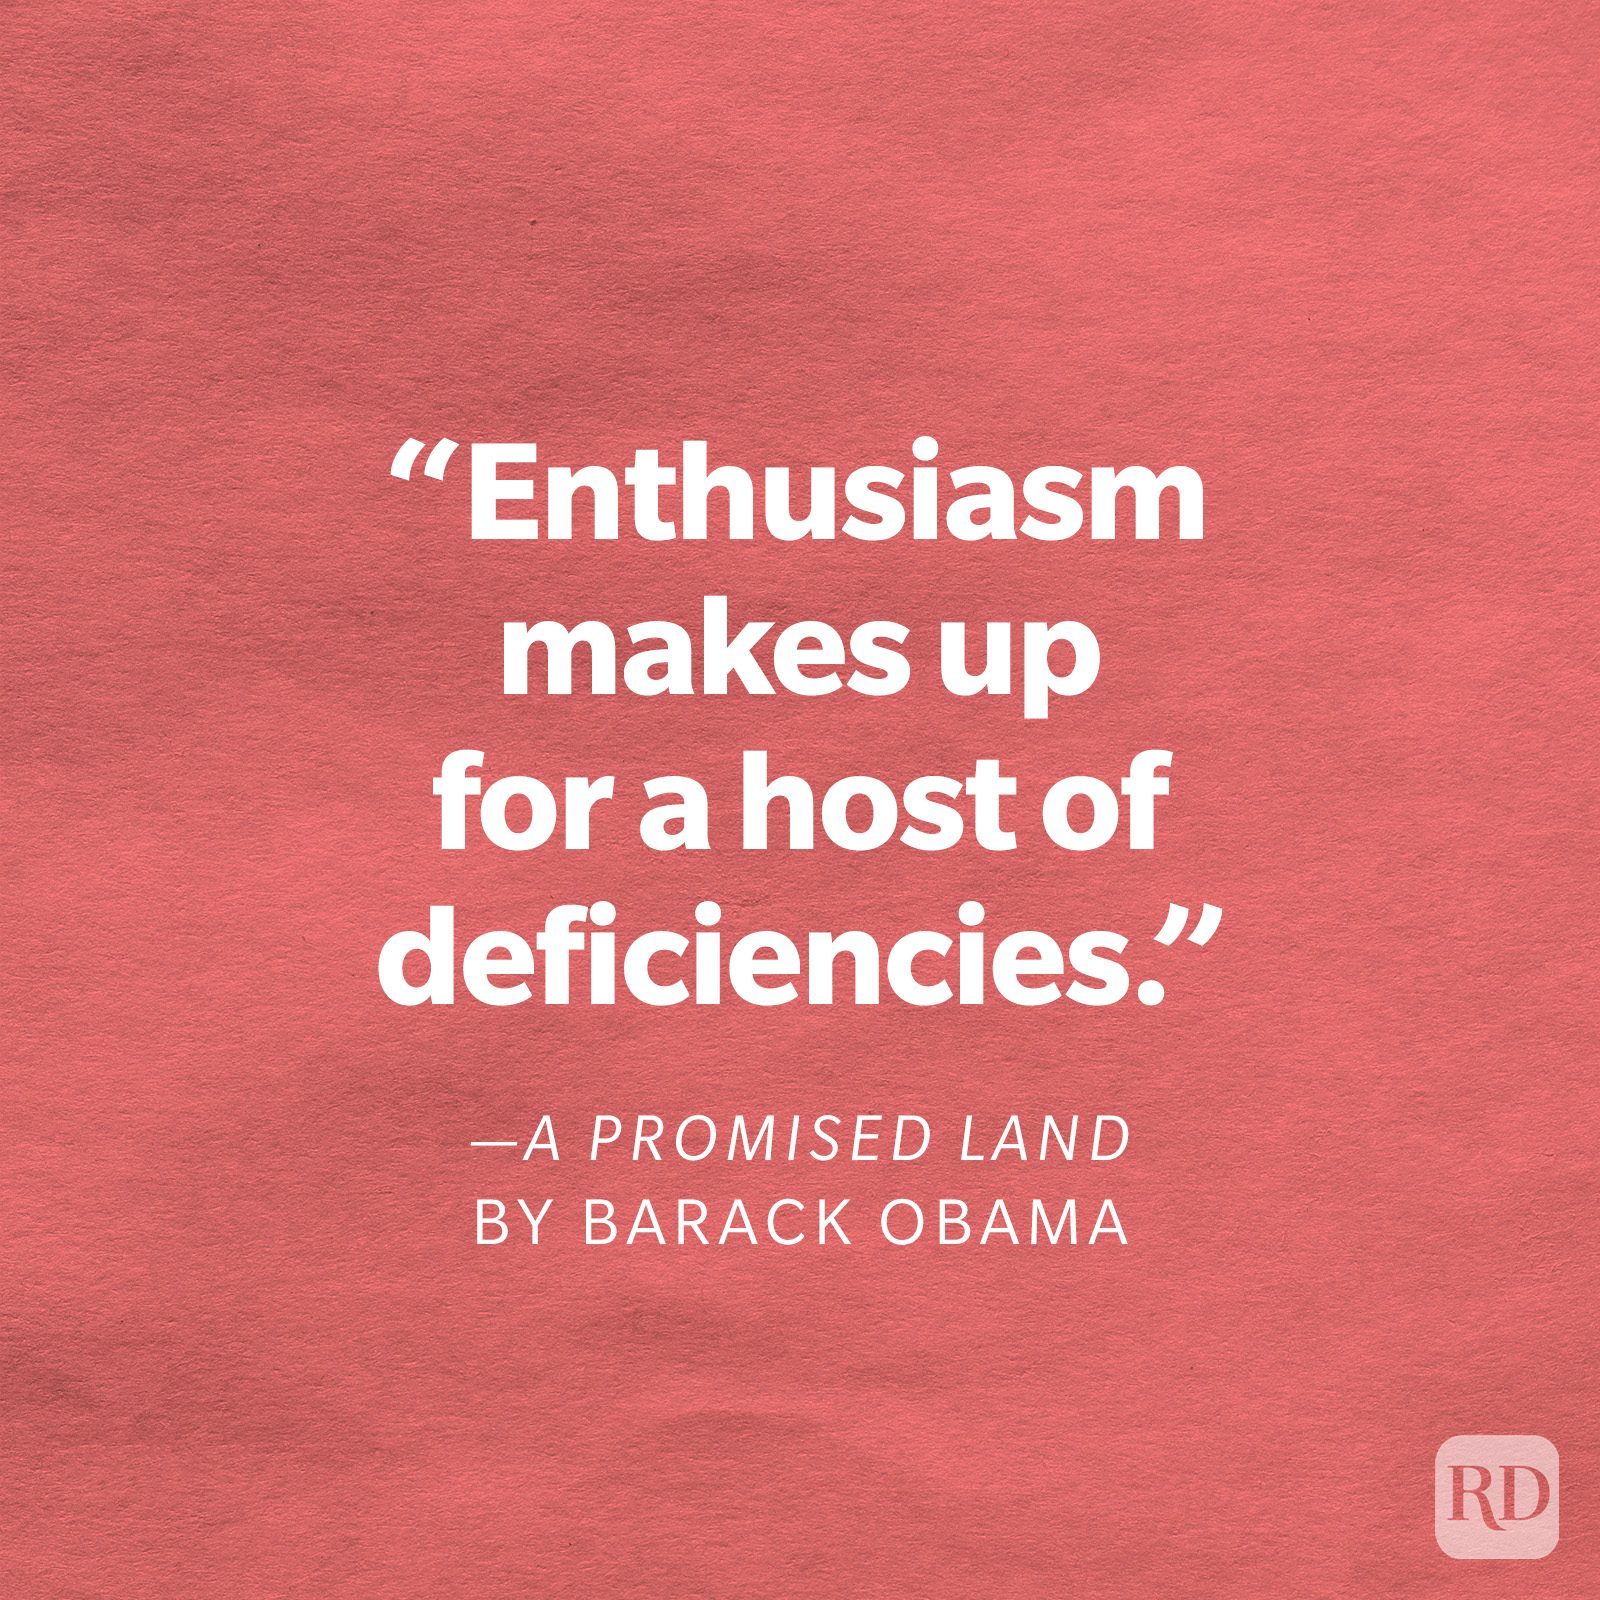 A Promised Land by Barack Obama quote: "Enthusiasm makes up for a host of deficiencies."